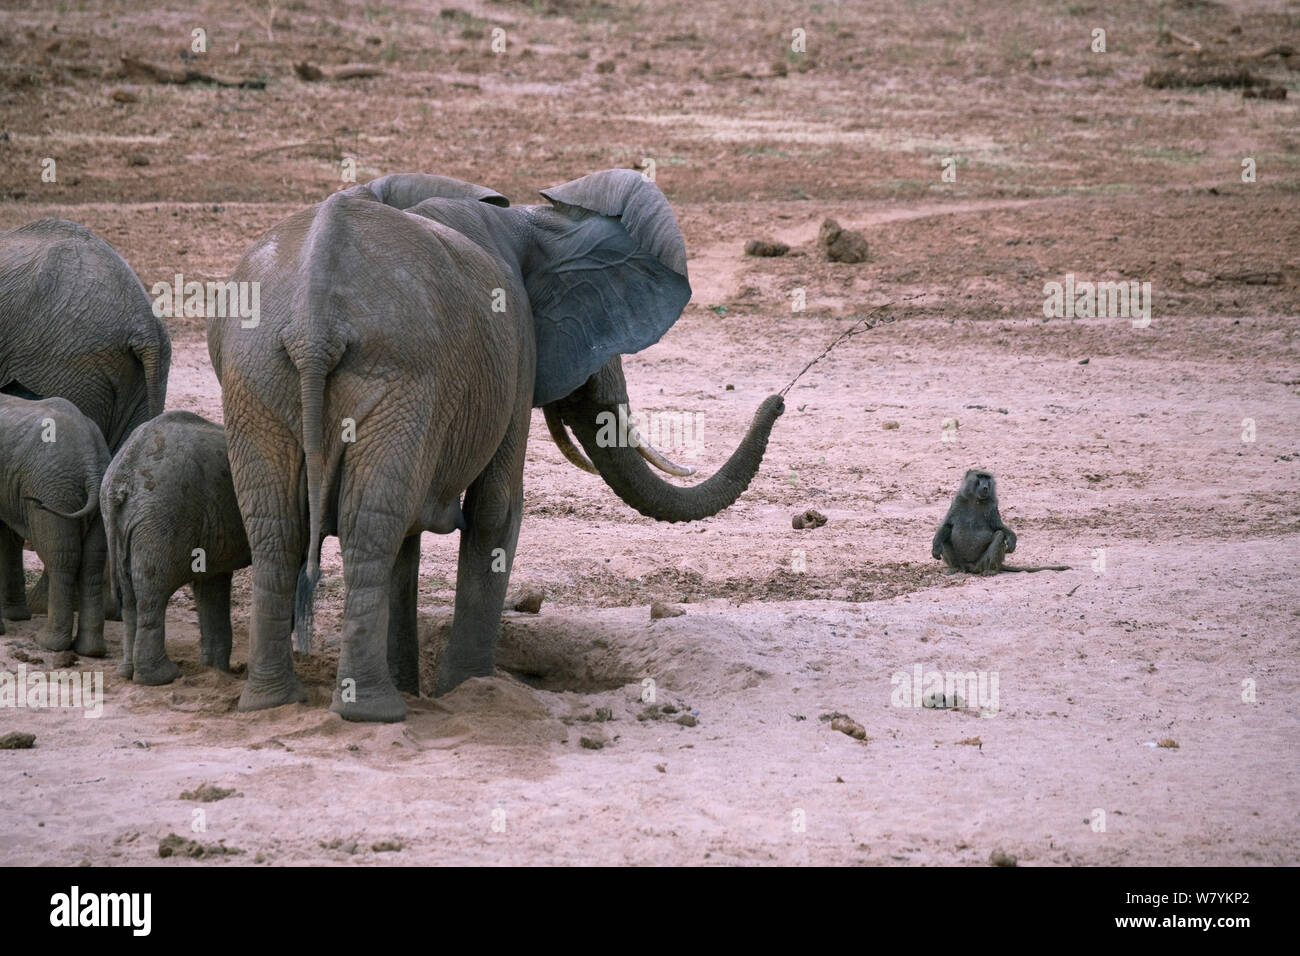 Female elephant (Loxodonta africana) squirting water at a Olive baboon (Papio anubis) waiting its turn to drink at a water hole dug by the elephant in the dry Ewaso Nyiro riverbed. Taken during the worst drought (2008-2009) in more than a decade, Northern Kenya, Samburu National Reserve, Kenya. Stock Photo